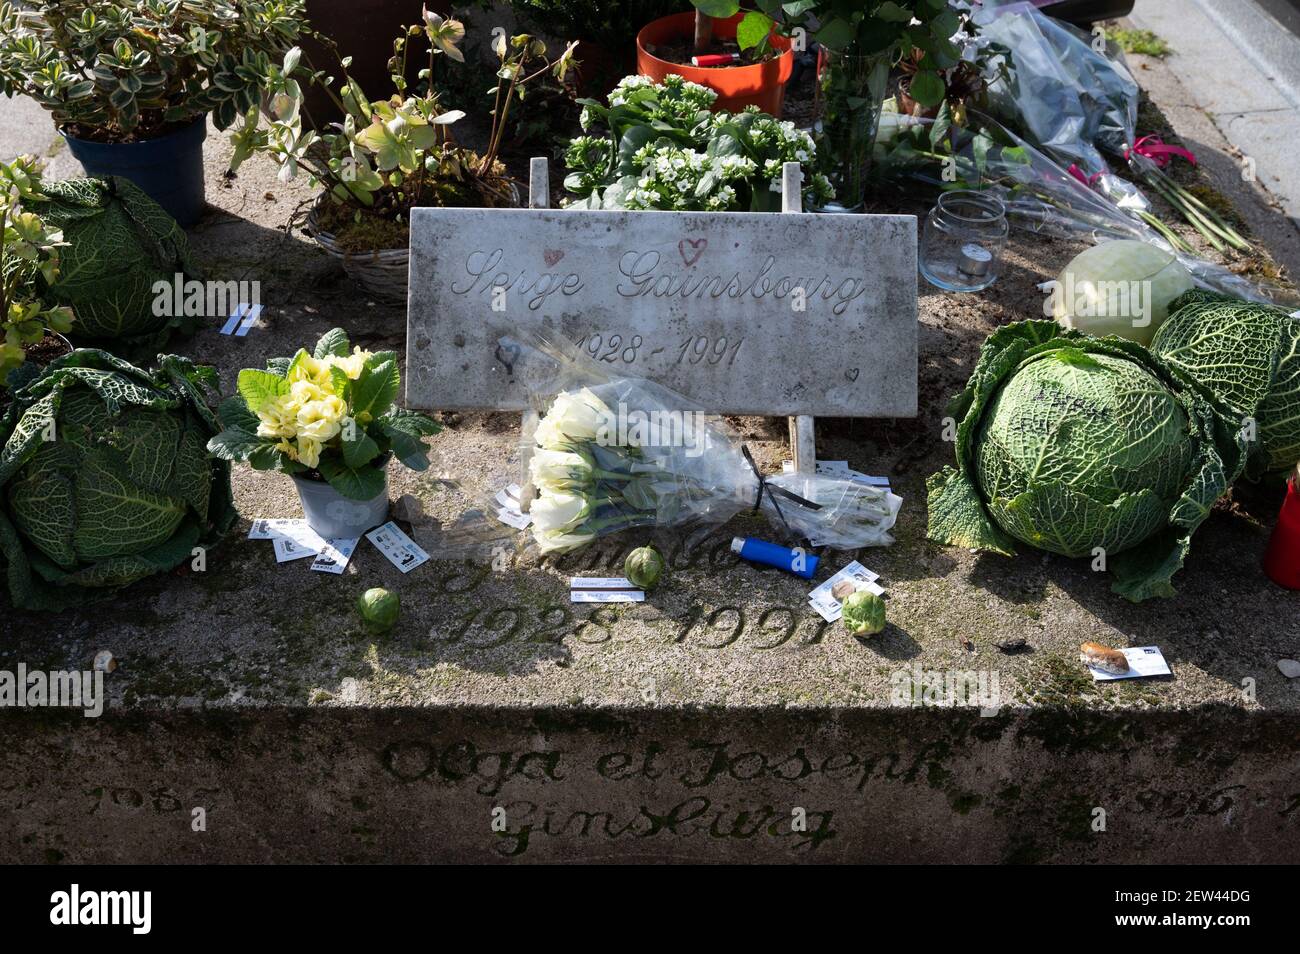 Fans gather next to the late singer and author Serge Ganisbourg’s grave, in Montparnasse cemetery in Paris, France, on March 2, 2021, on the very day that Gainsbourg passed away 30 years ago, on March 2, 1991. Photo by Ammar Abd Rabbo/ABACAPRESS.COM Stock Photo